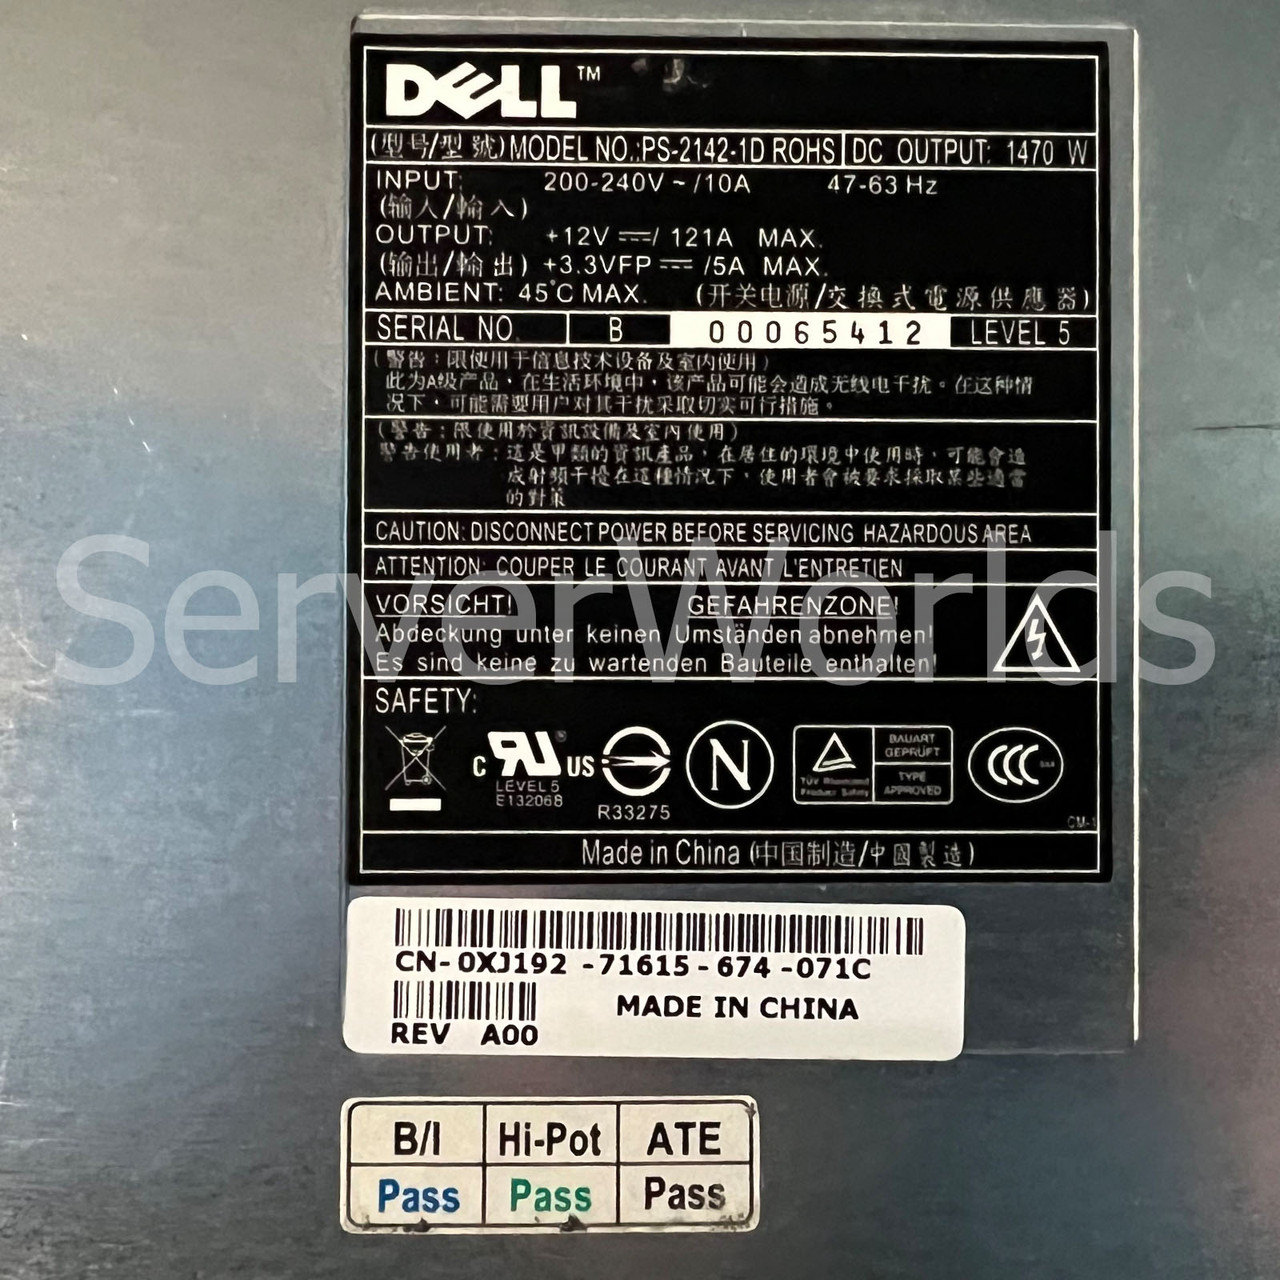 Dell XJ192 Poweredge 6850 Power Supply PS-2142-1D